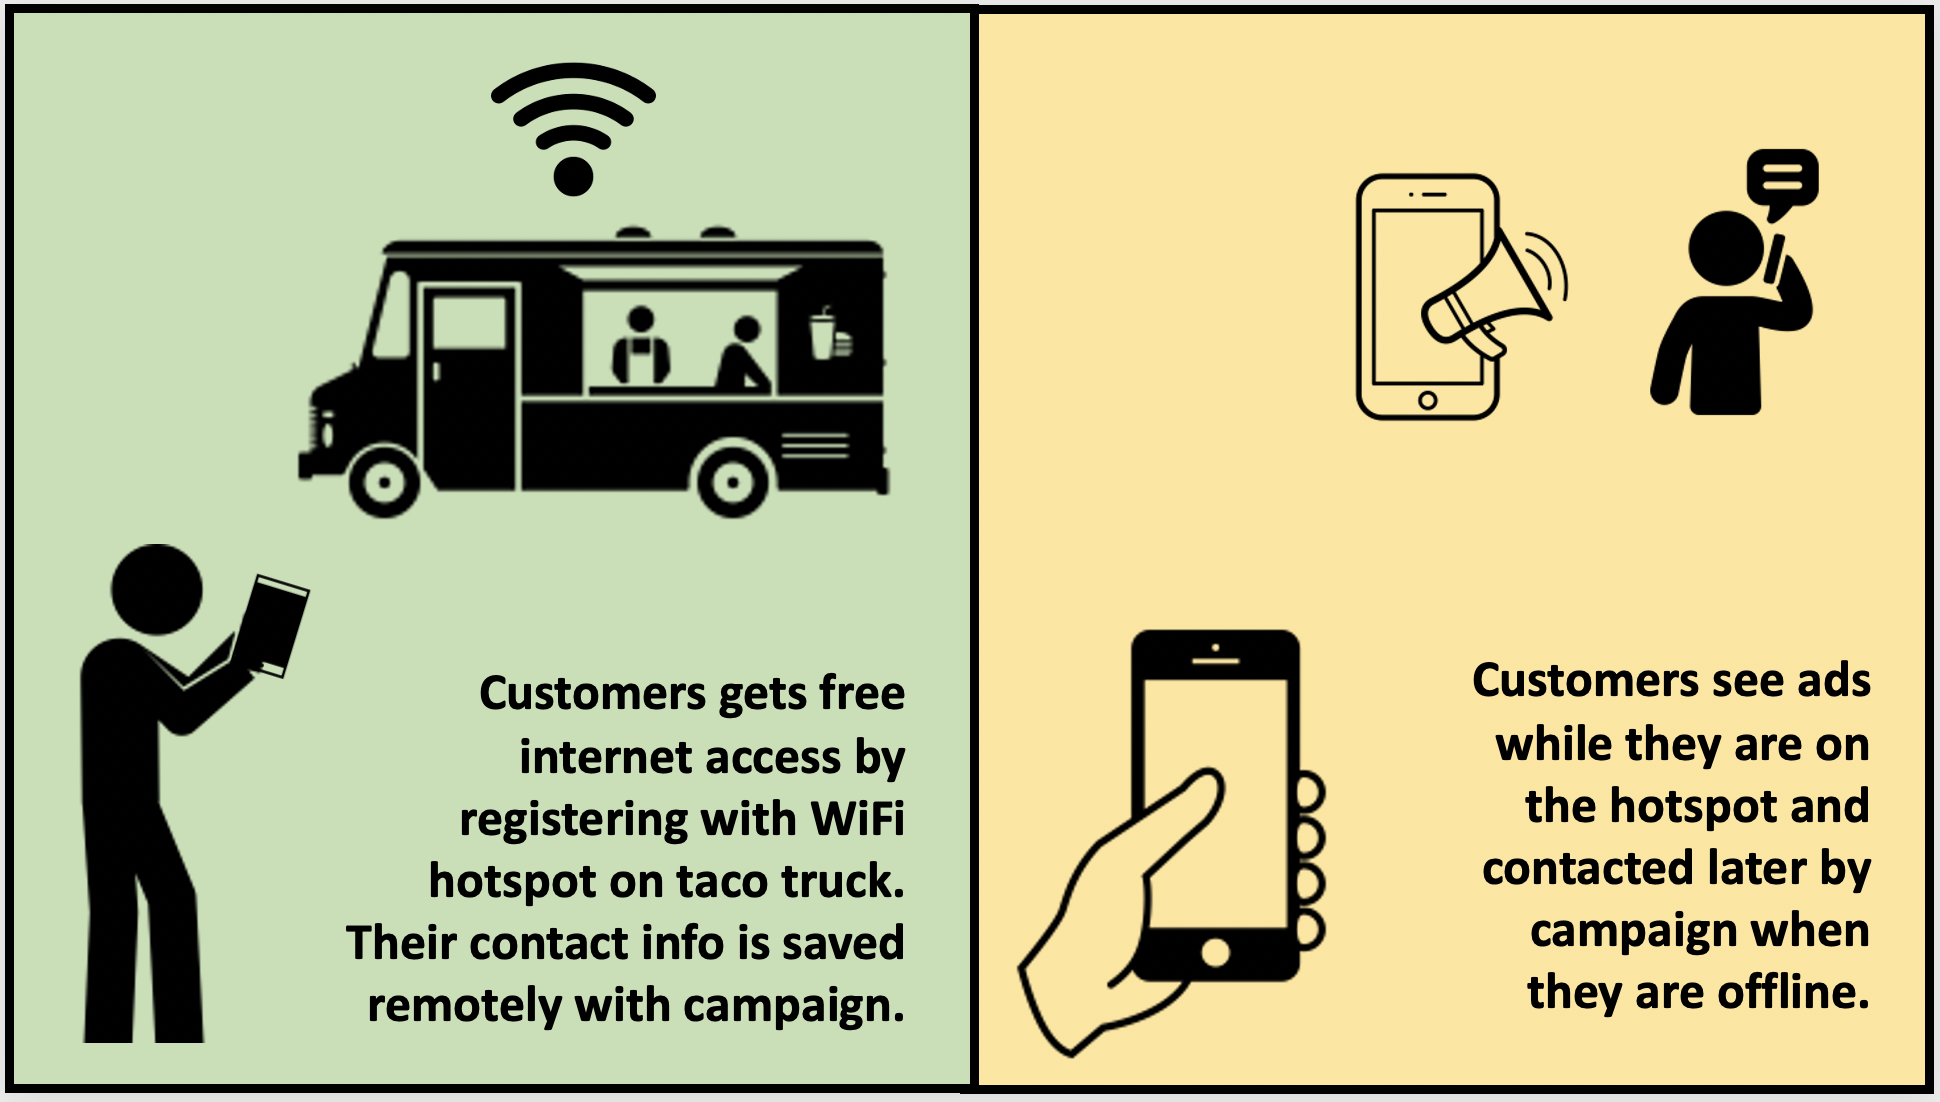 Customers get free internet access by registering with their contact details. They see ads while they are connected and can also be contacted afterwards while they are not connected to the hotspot.